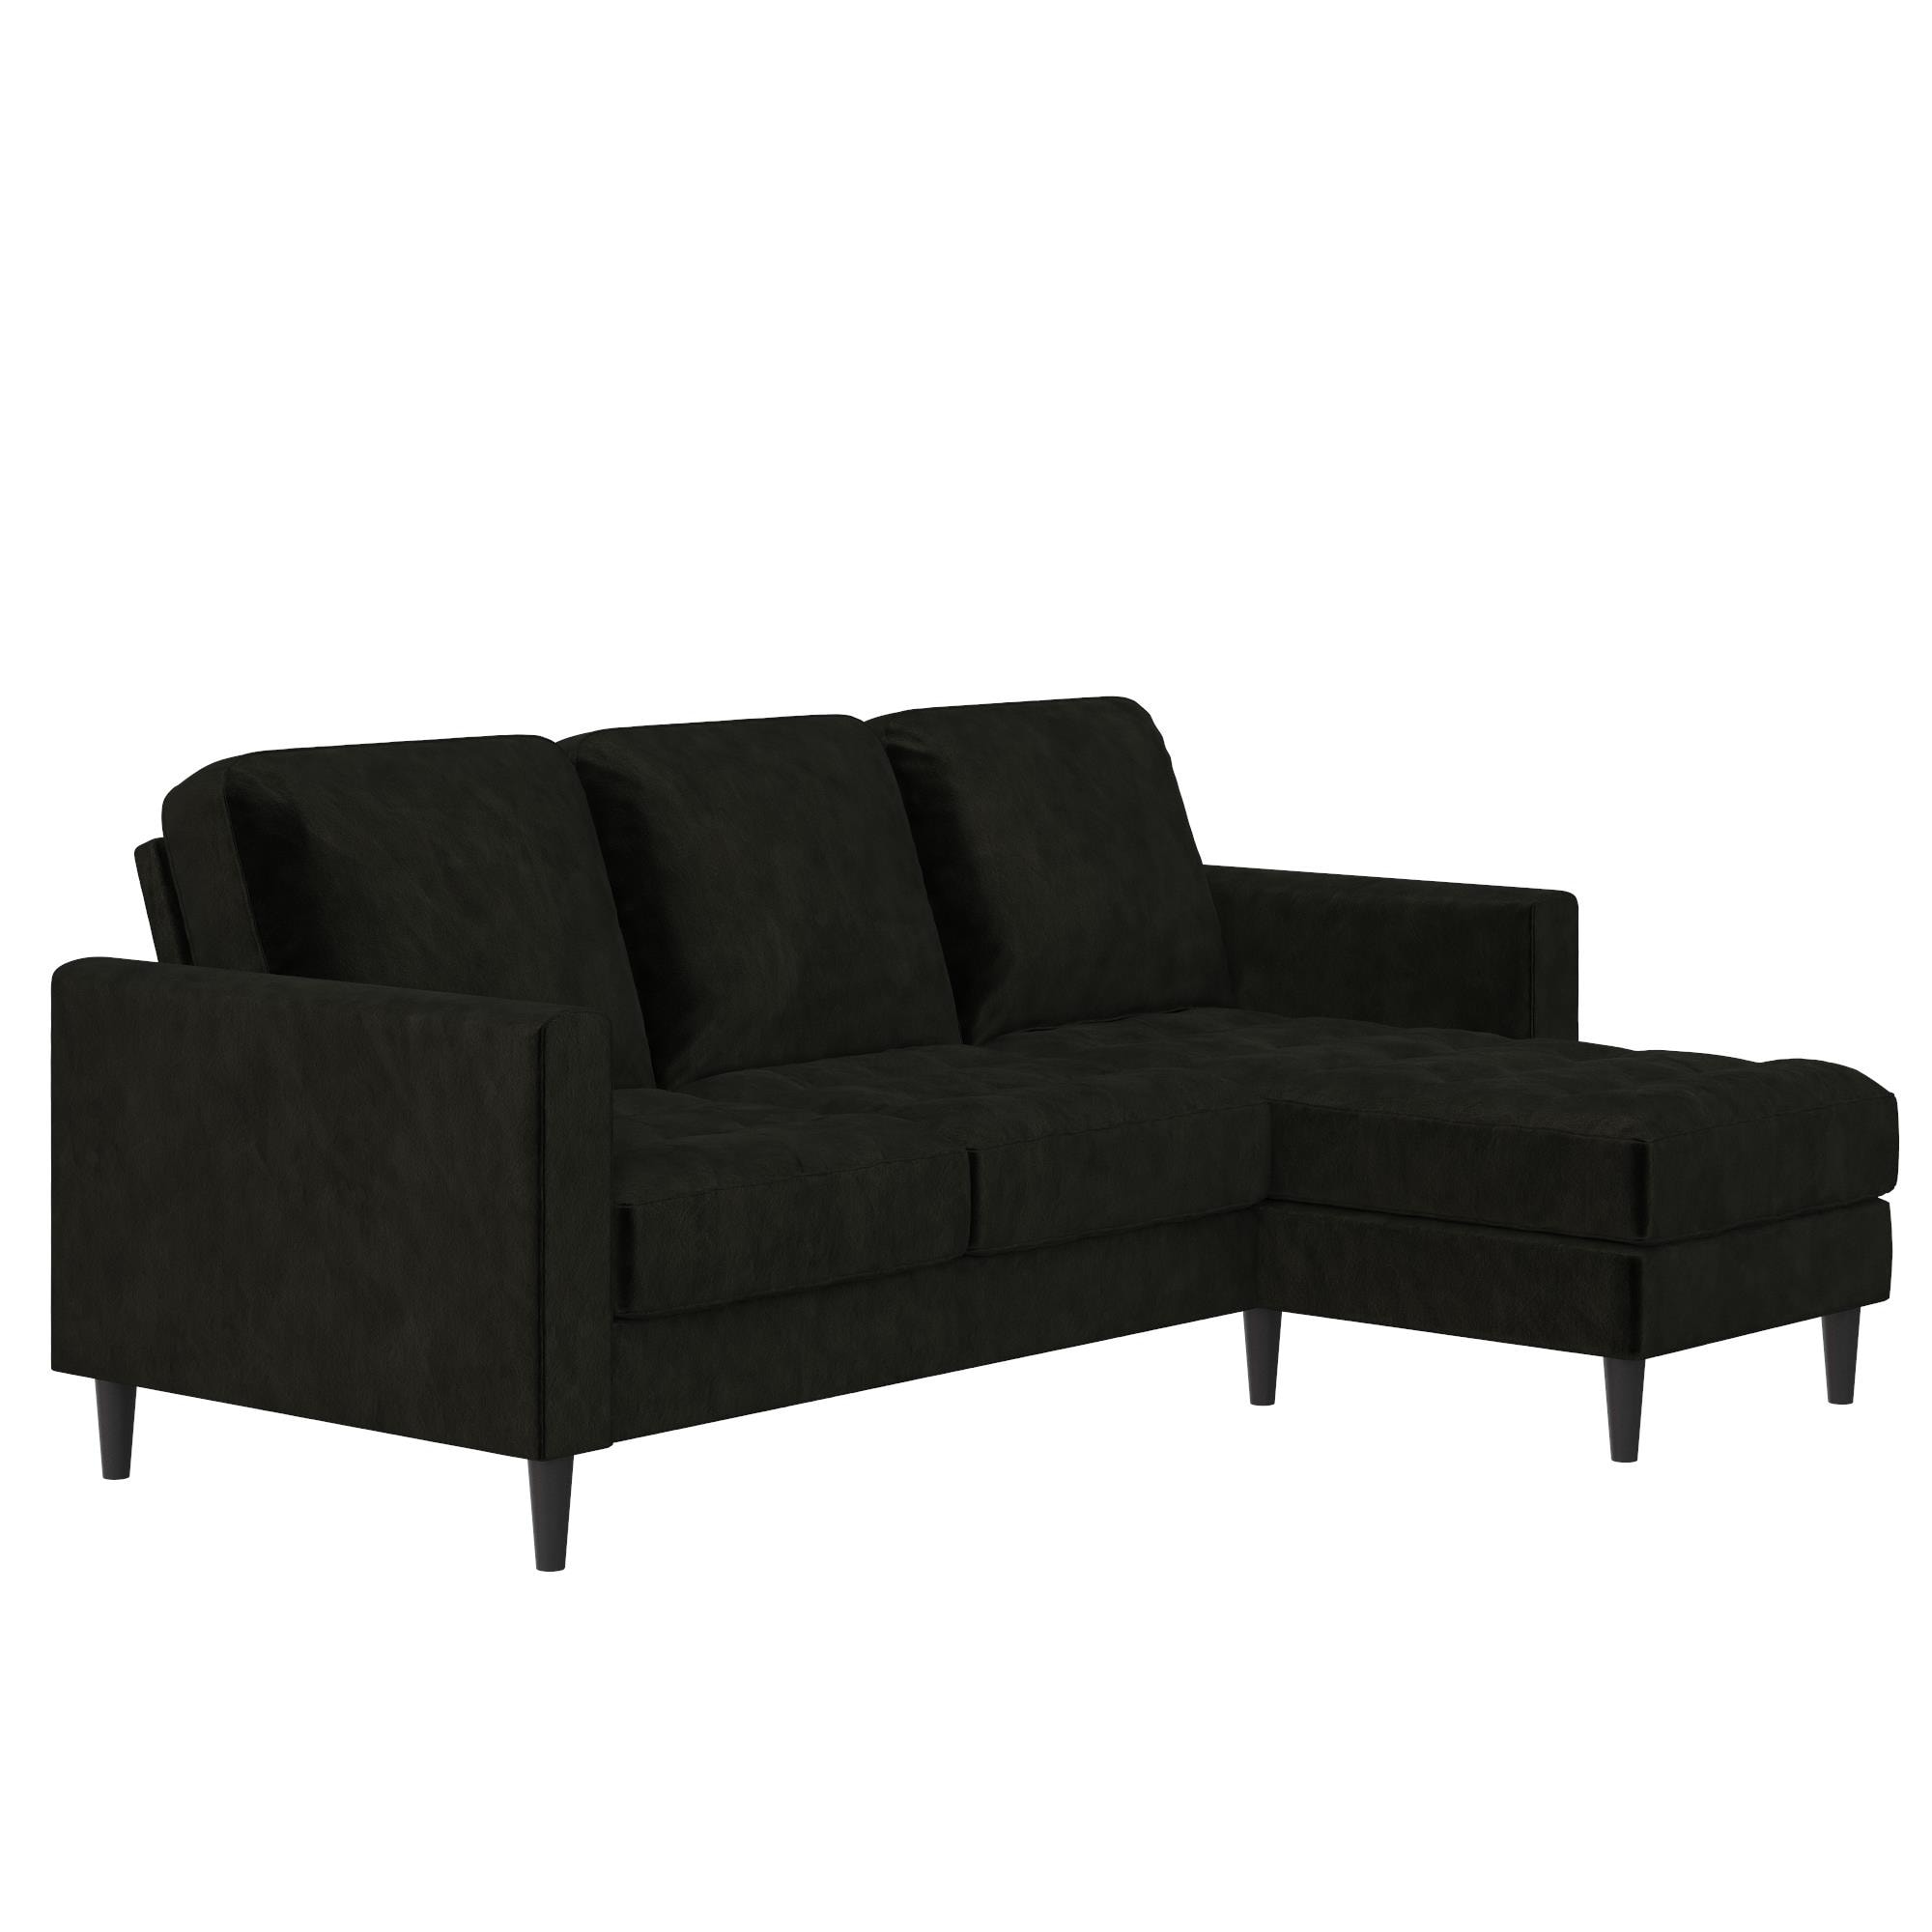 Cosmoliving By Cosmopolitan Strummer Reversible Sectional Sofa Couch